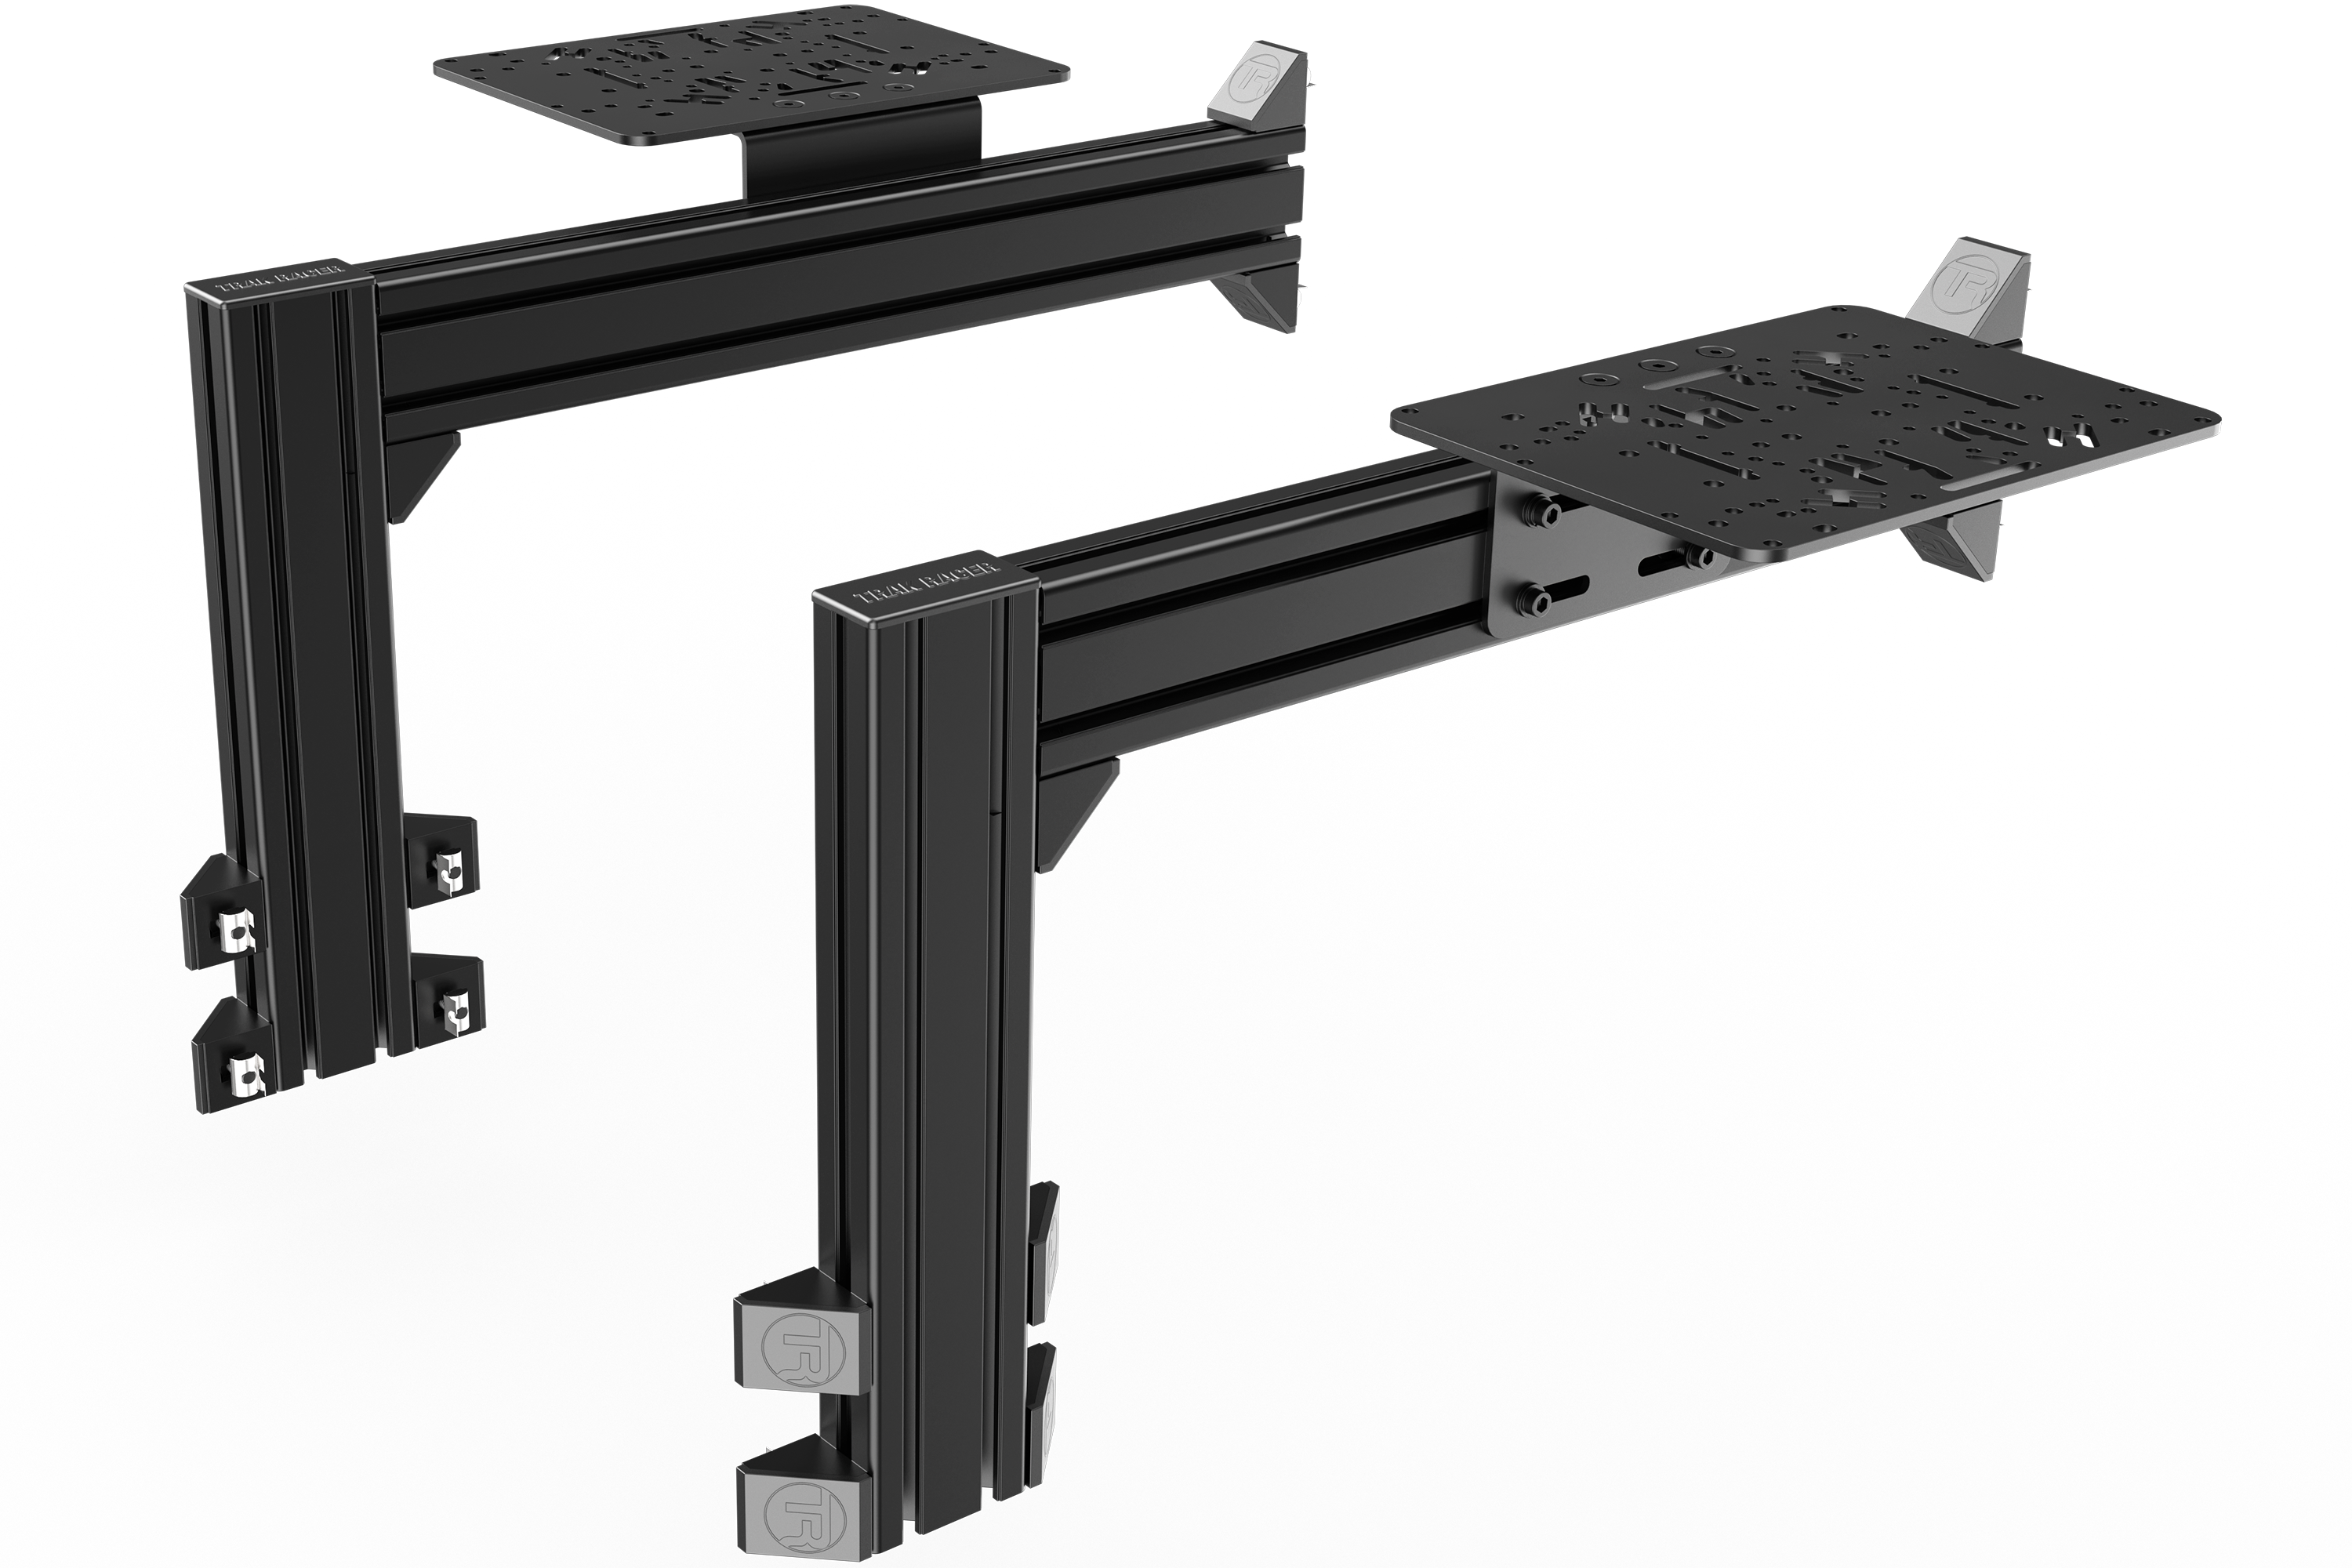 Flight Sim Control Mounts with 2 Side Supports for all Aluminum Cockpits